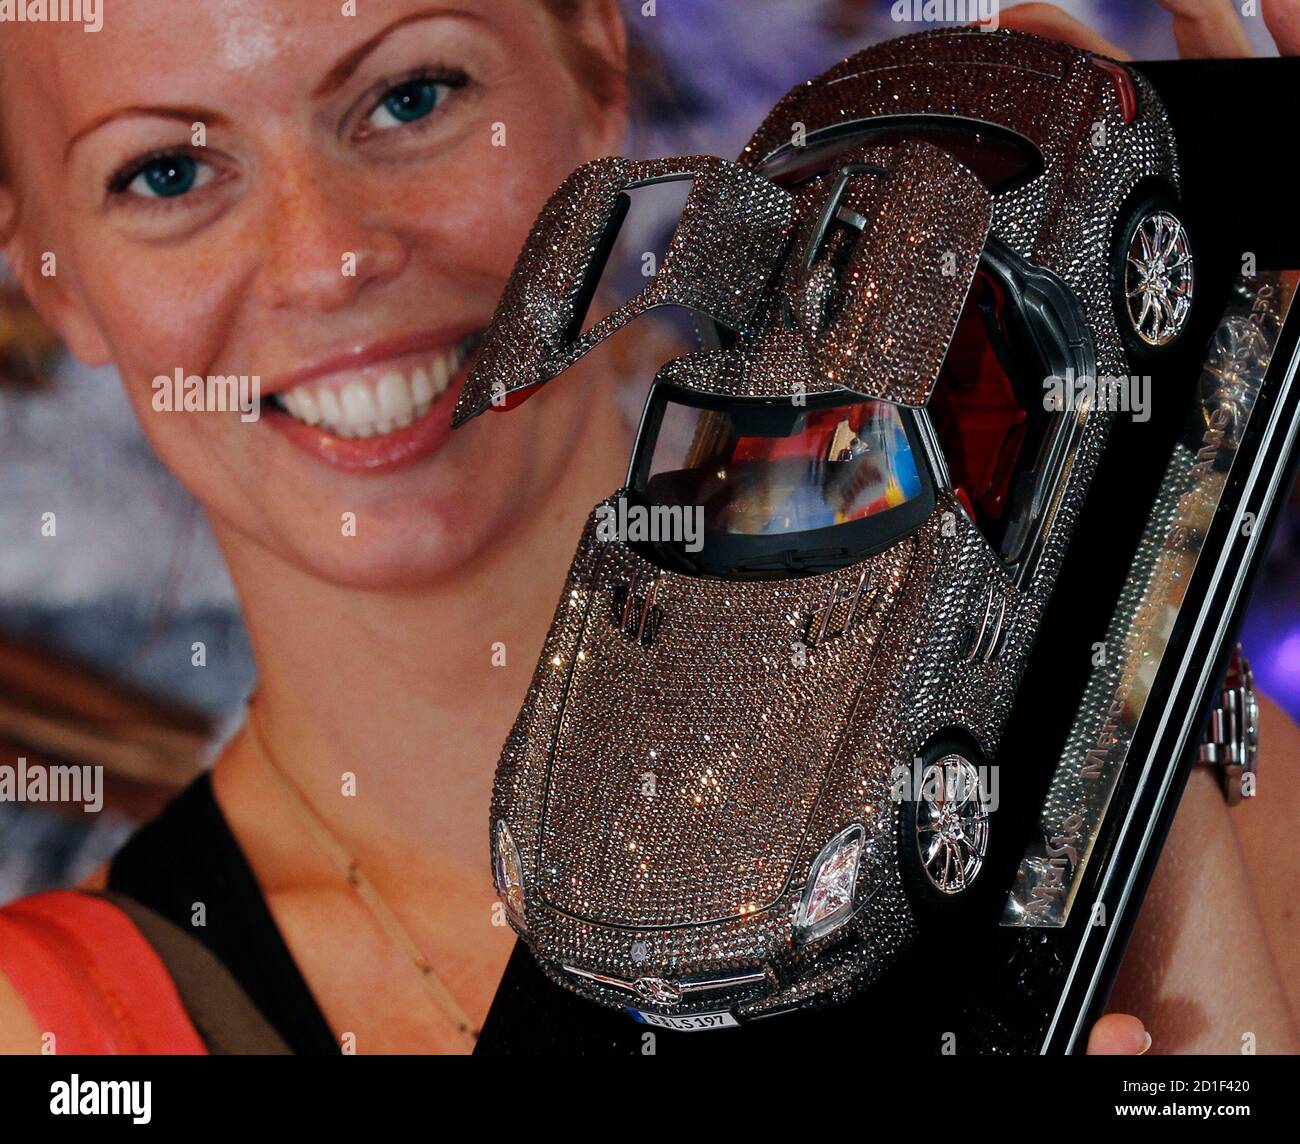 Hamleys employee poses with a scale Mercedes Benz SLS AMG with Crystallized  Swarovski Elements for sale at Hamleys toy shop costing £1,500 in London,  July 1, 2010. Hamleys, which is celebrating its